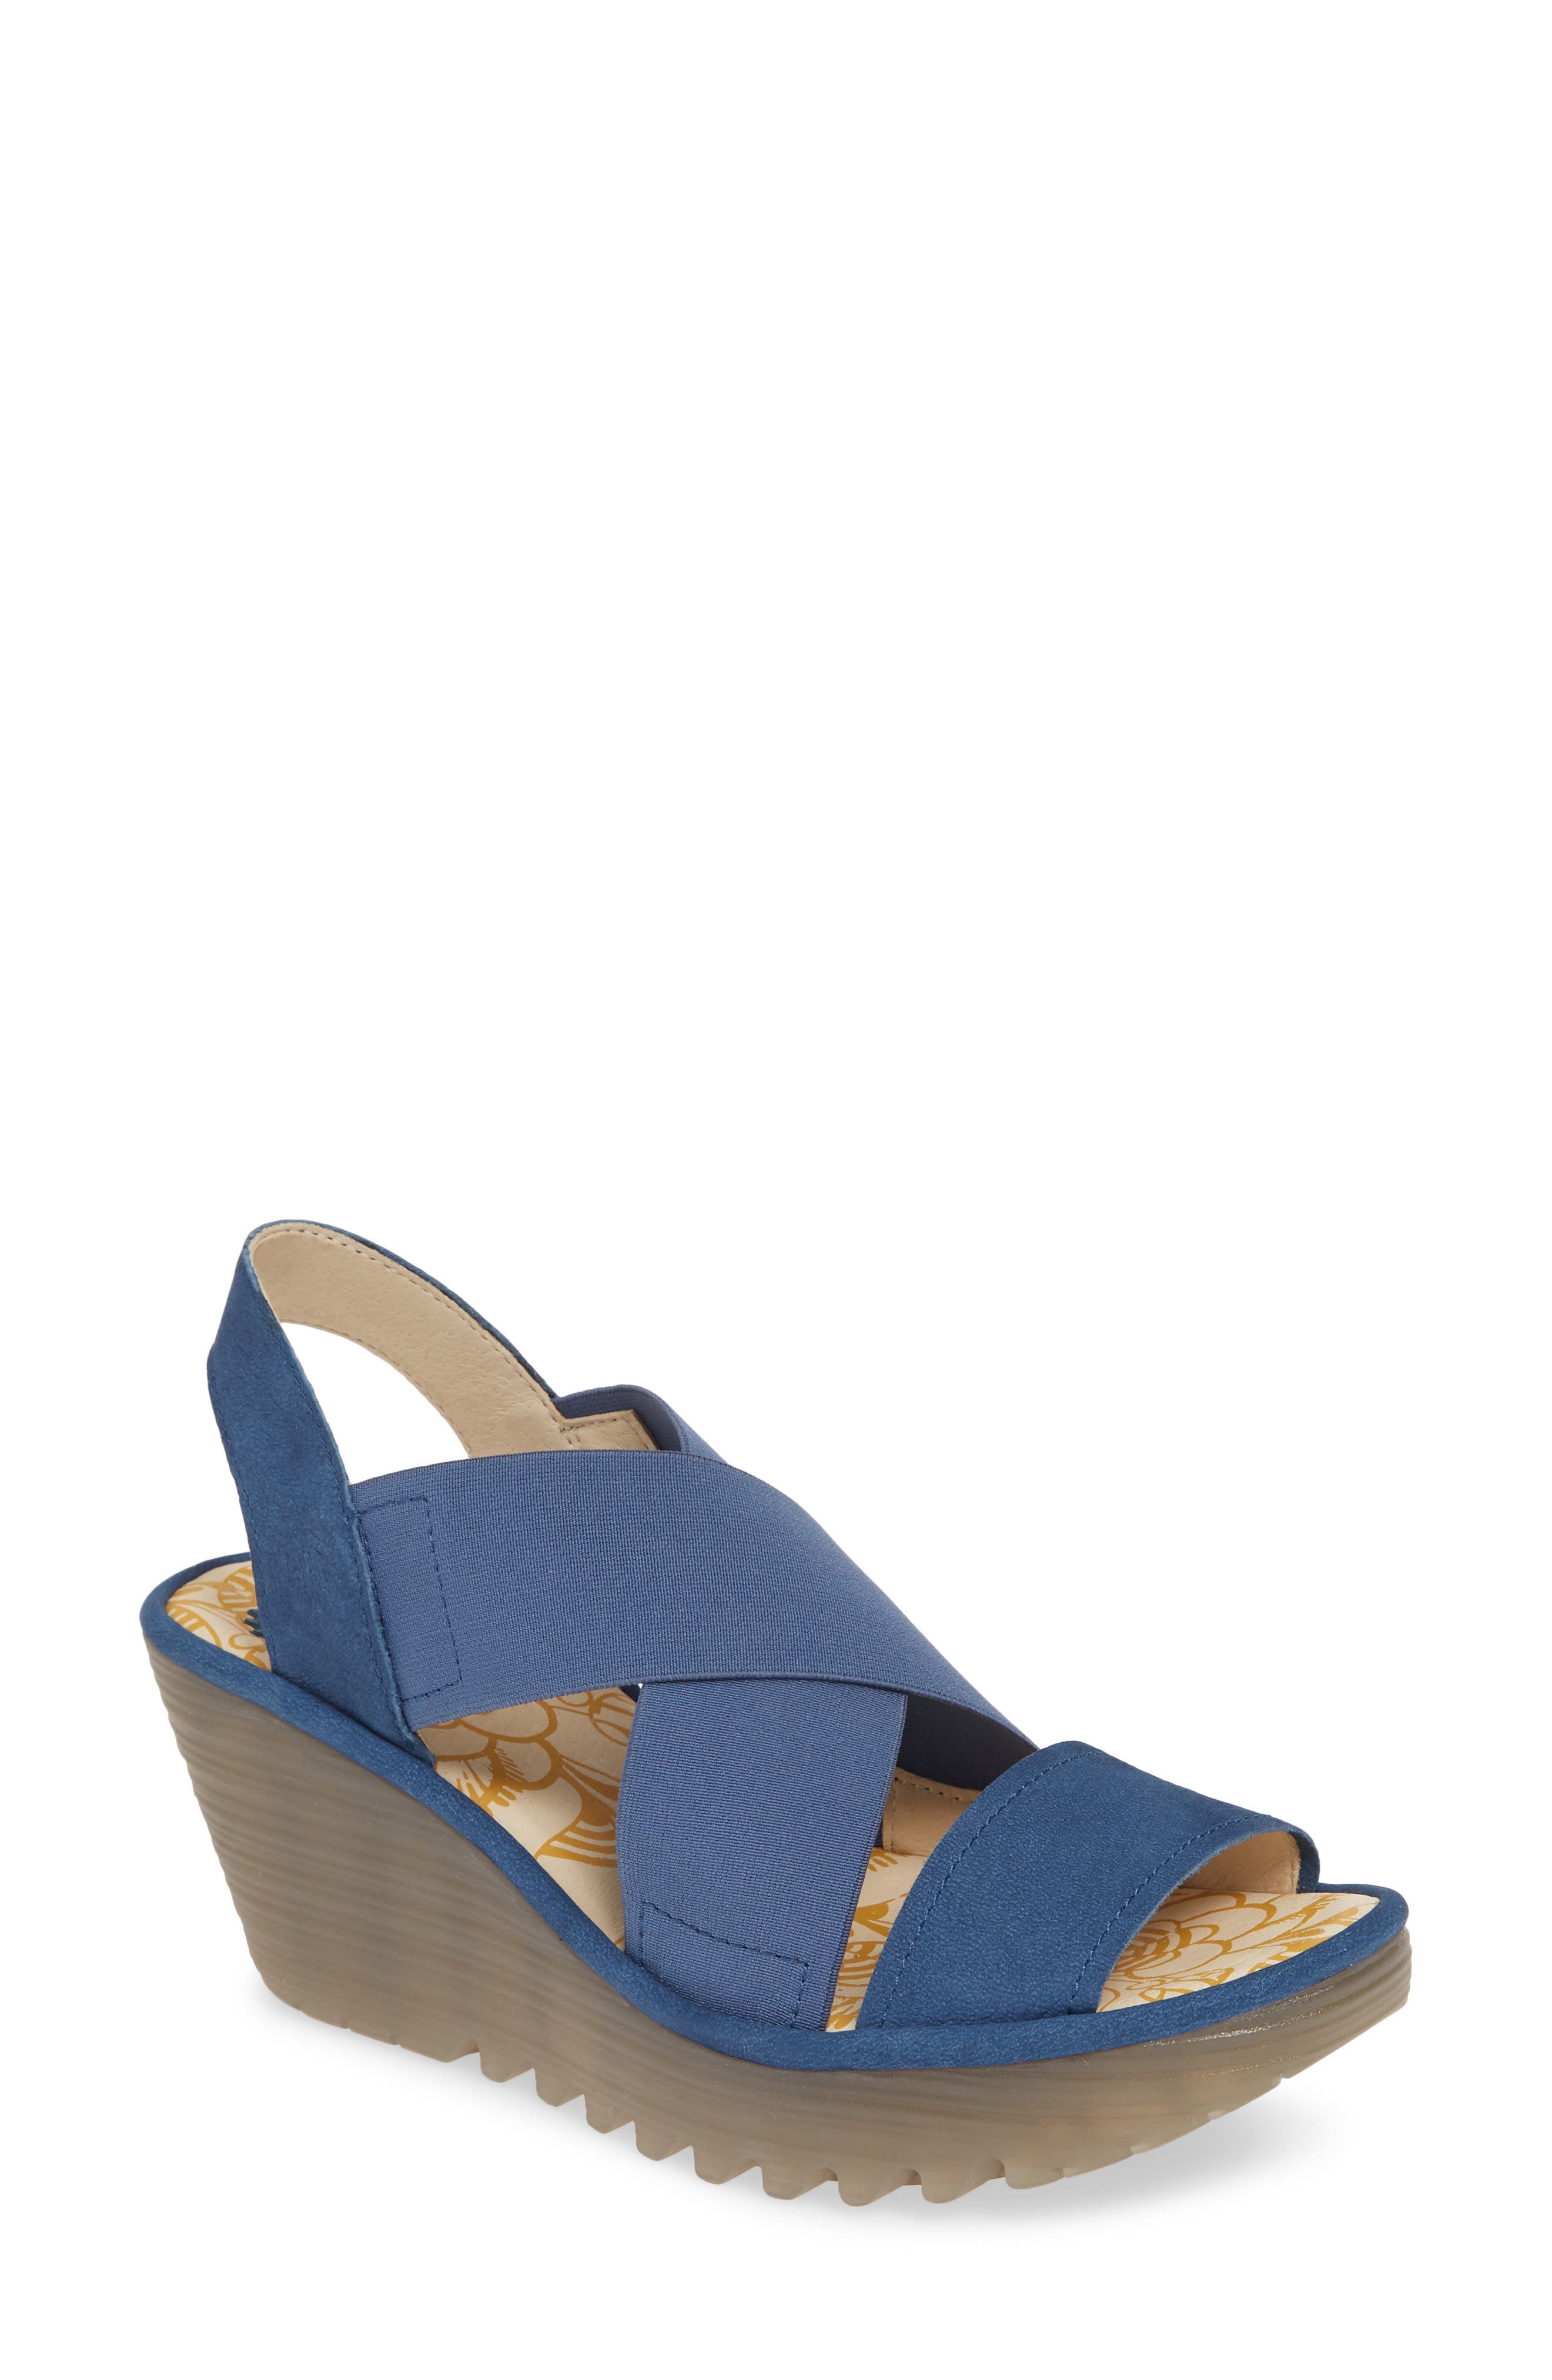 fly london blue sandals